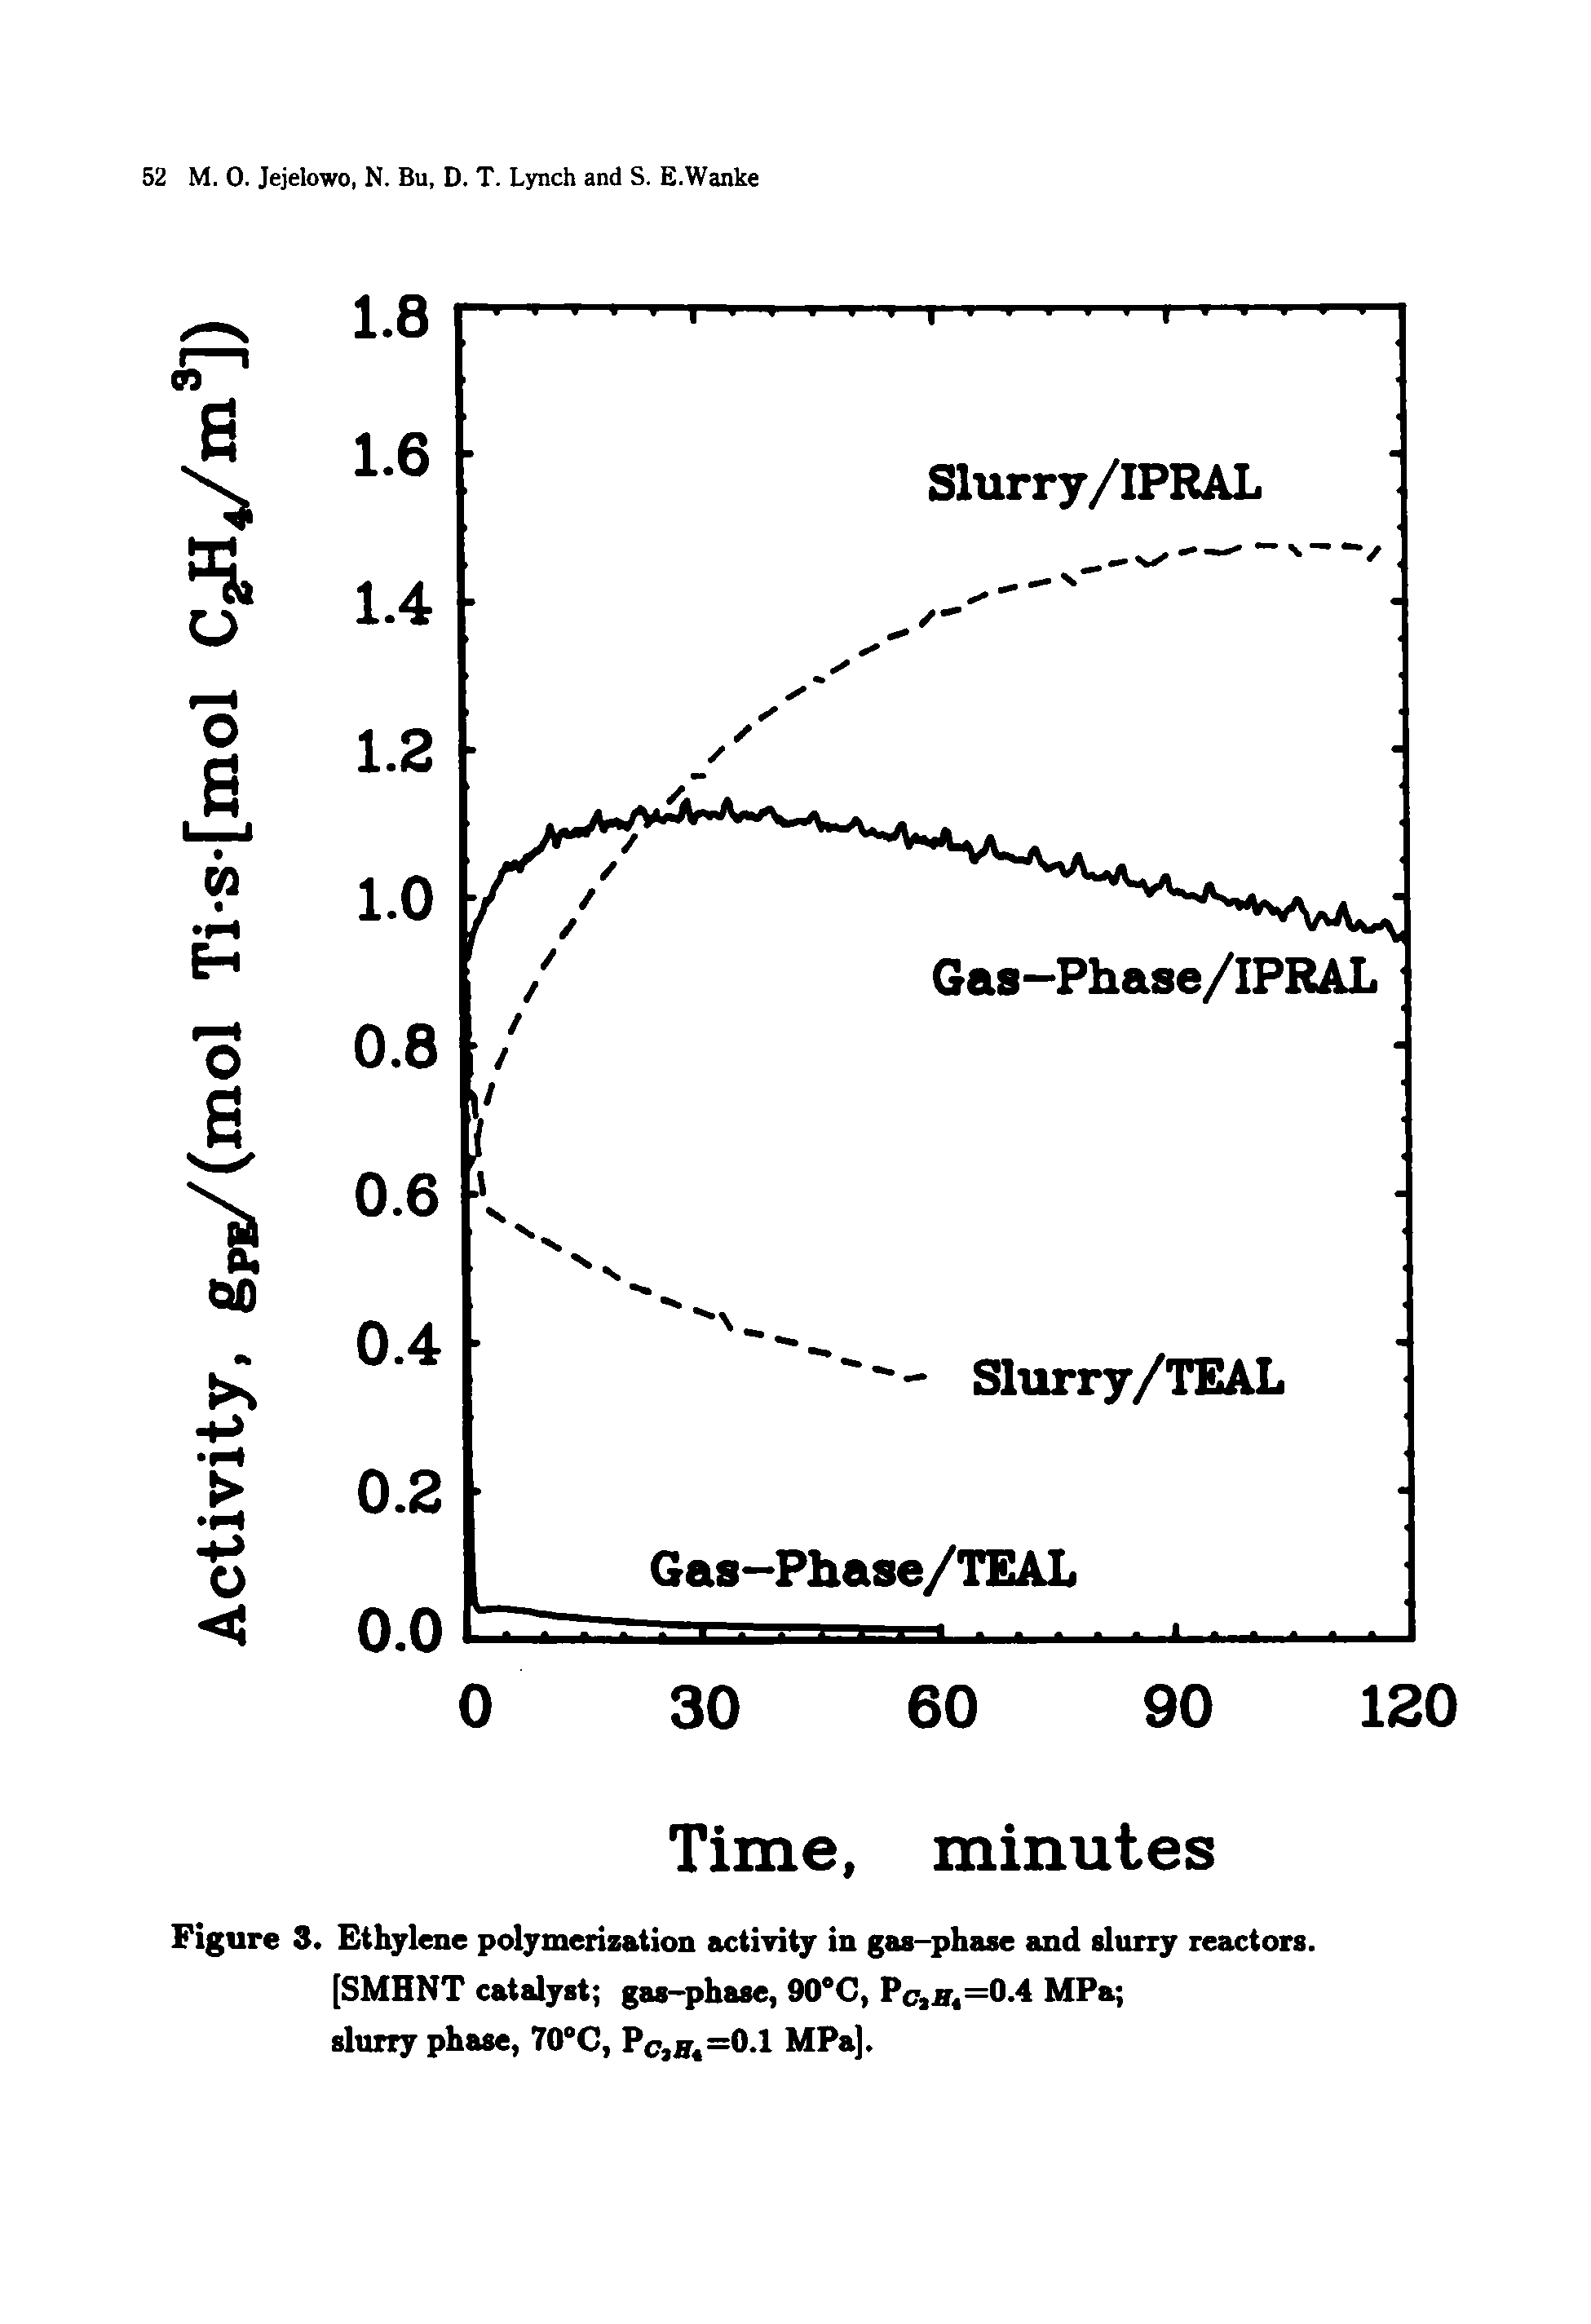 Figure 3. Ethylene polymerization activity in gas-phase and slurry reactors. [SMHNT catalyst gas-phase, 90 C, Pcair =0.4 MPa slurry phase, 70 C, Po,f =0.1 MPa].